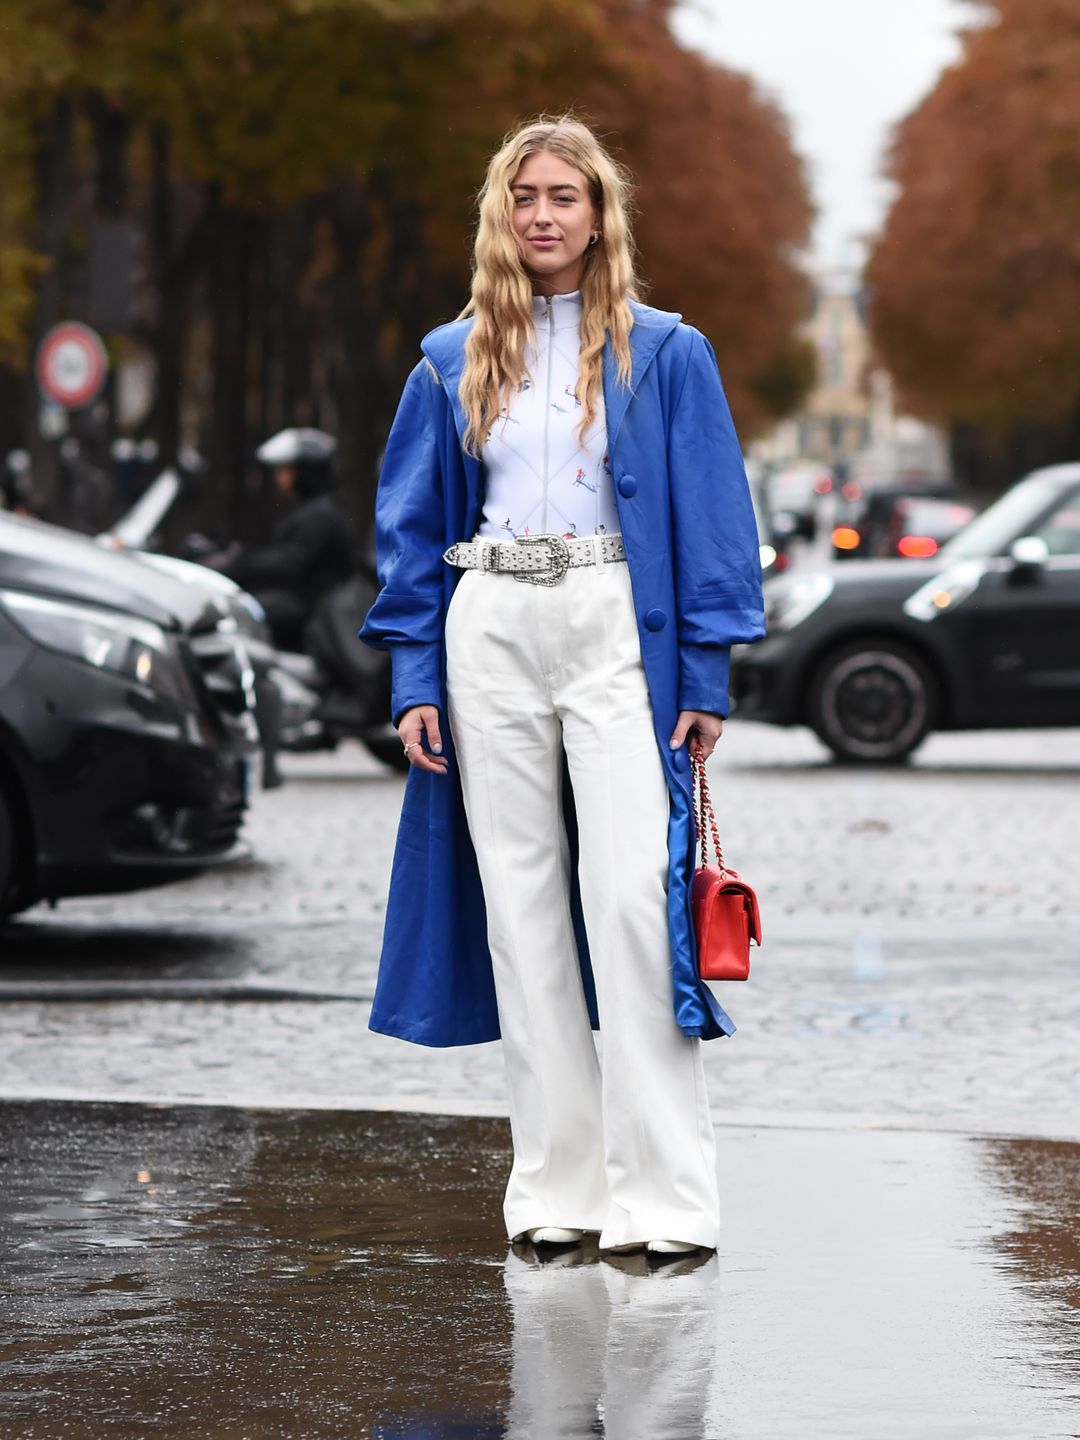 Fashion week guest wearing white jeans with a blue coat 